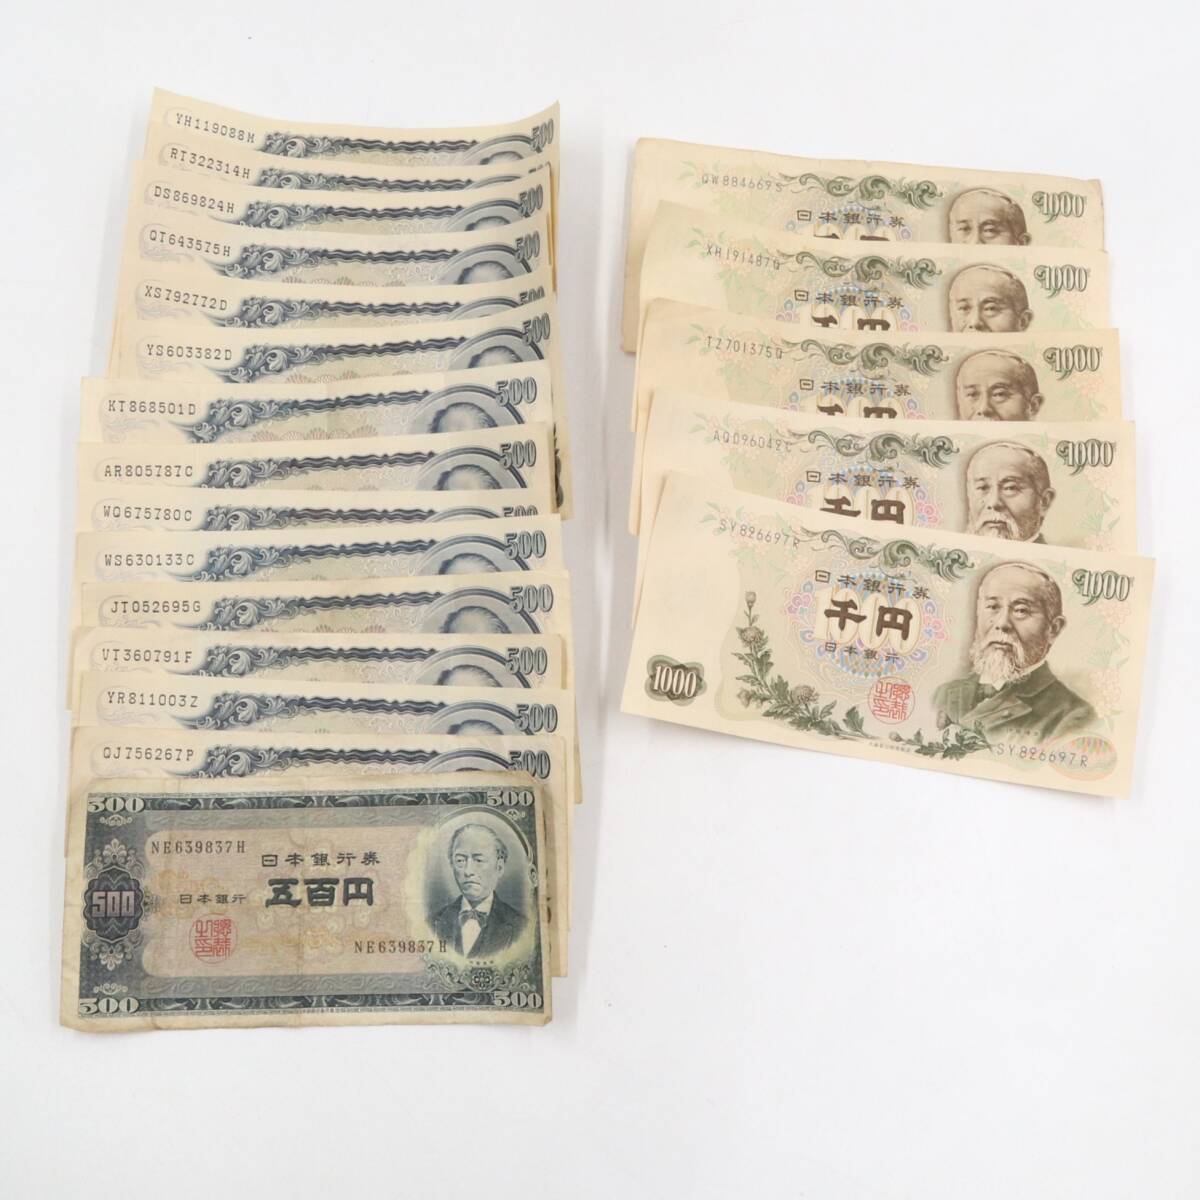 * old note 1000 jpy .. wistaria . writing 5 sheets rock ...500 jpy .15 sheets set sale face value 12500 jpy .. collection 